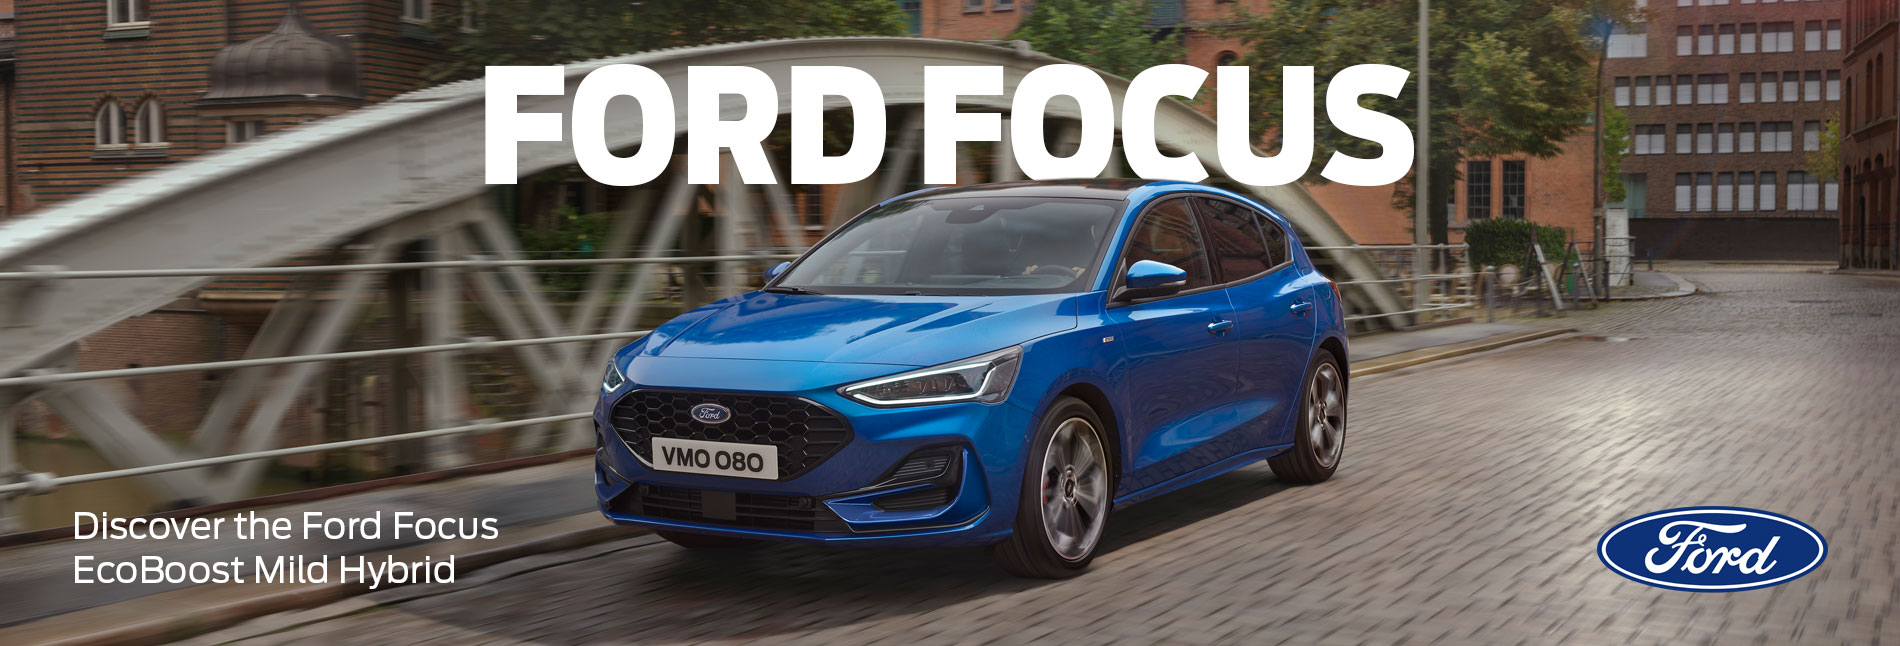 Ford Focus - Available from Busseys